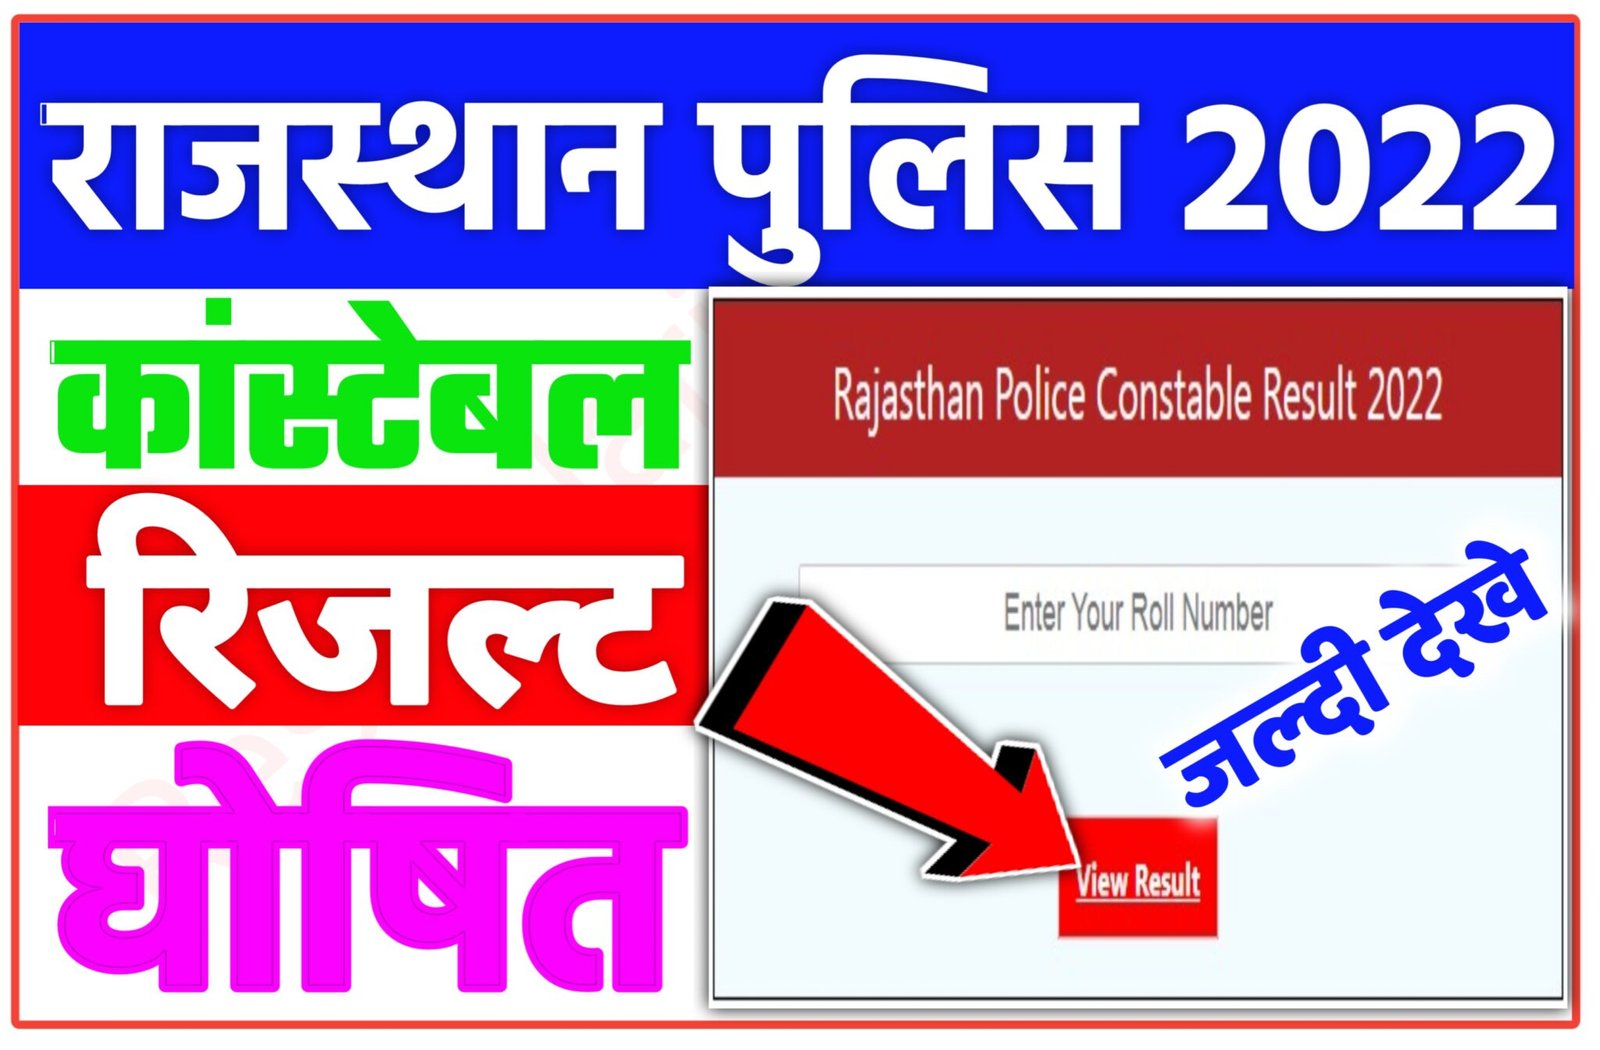 Rajasthan Police Constable Result 2022 Name Wise